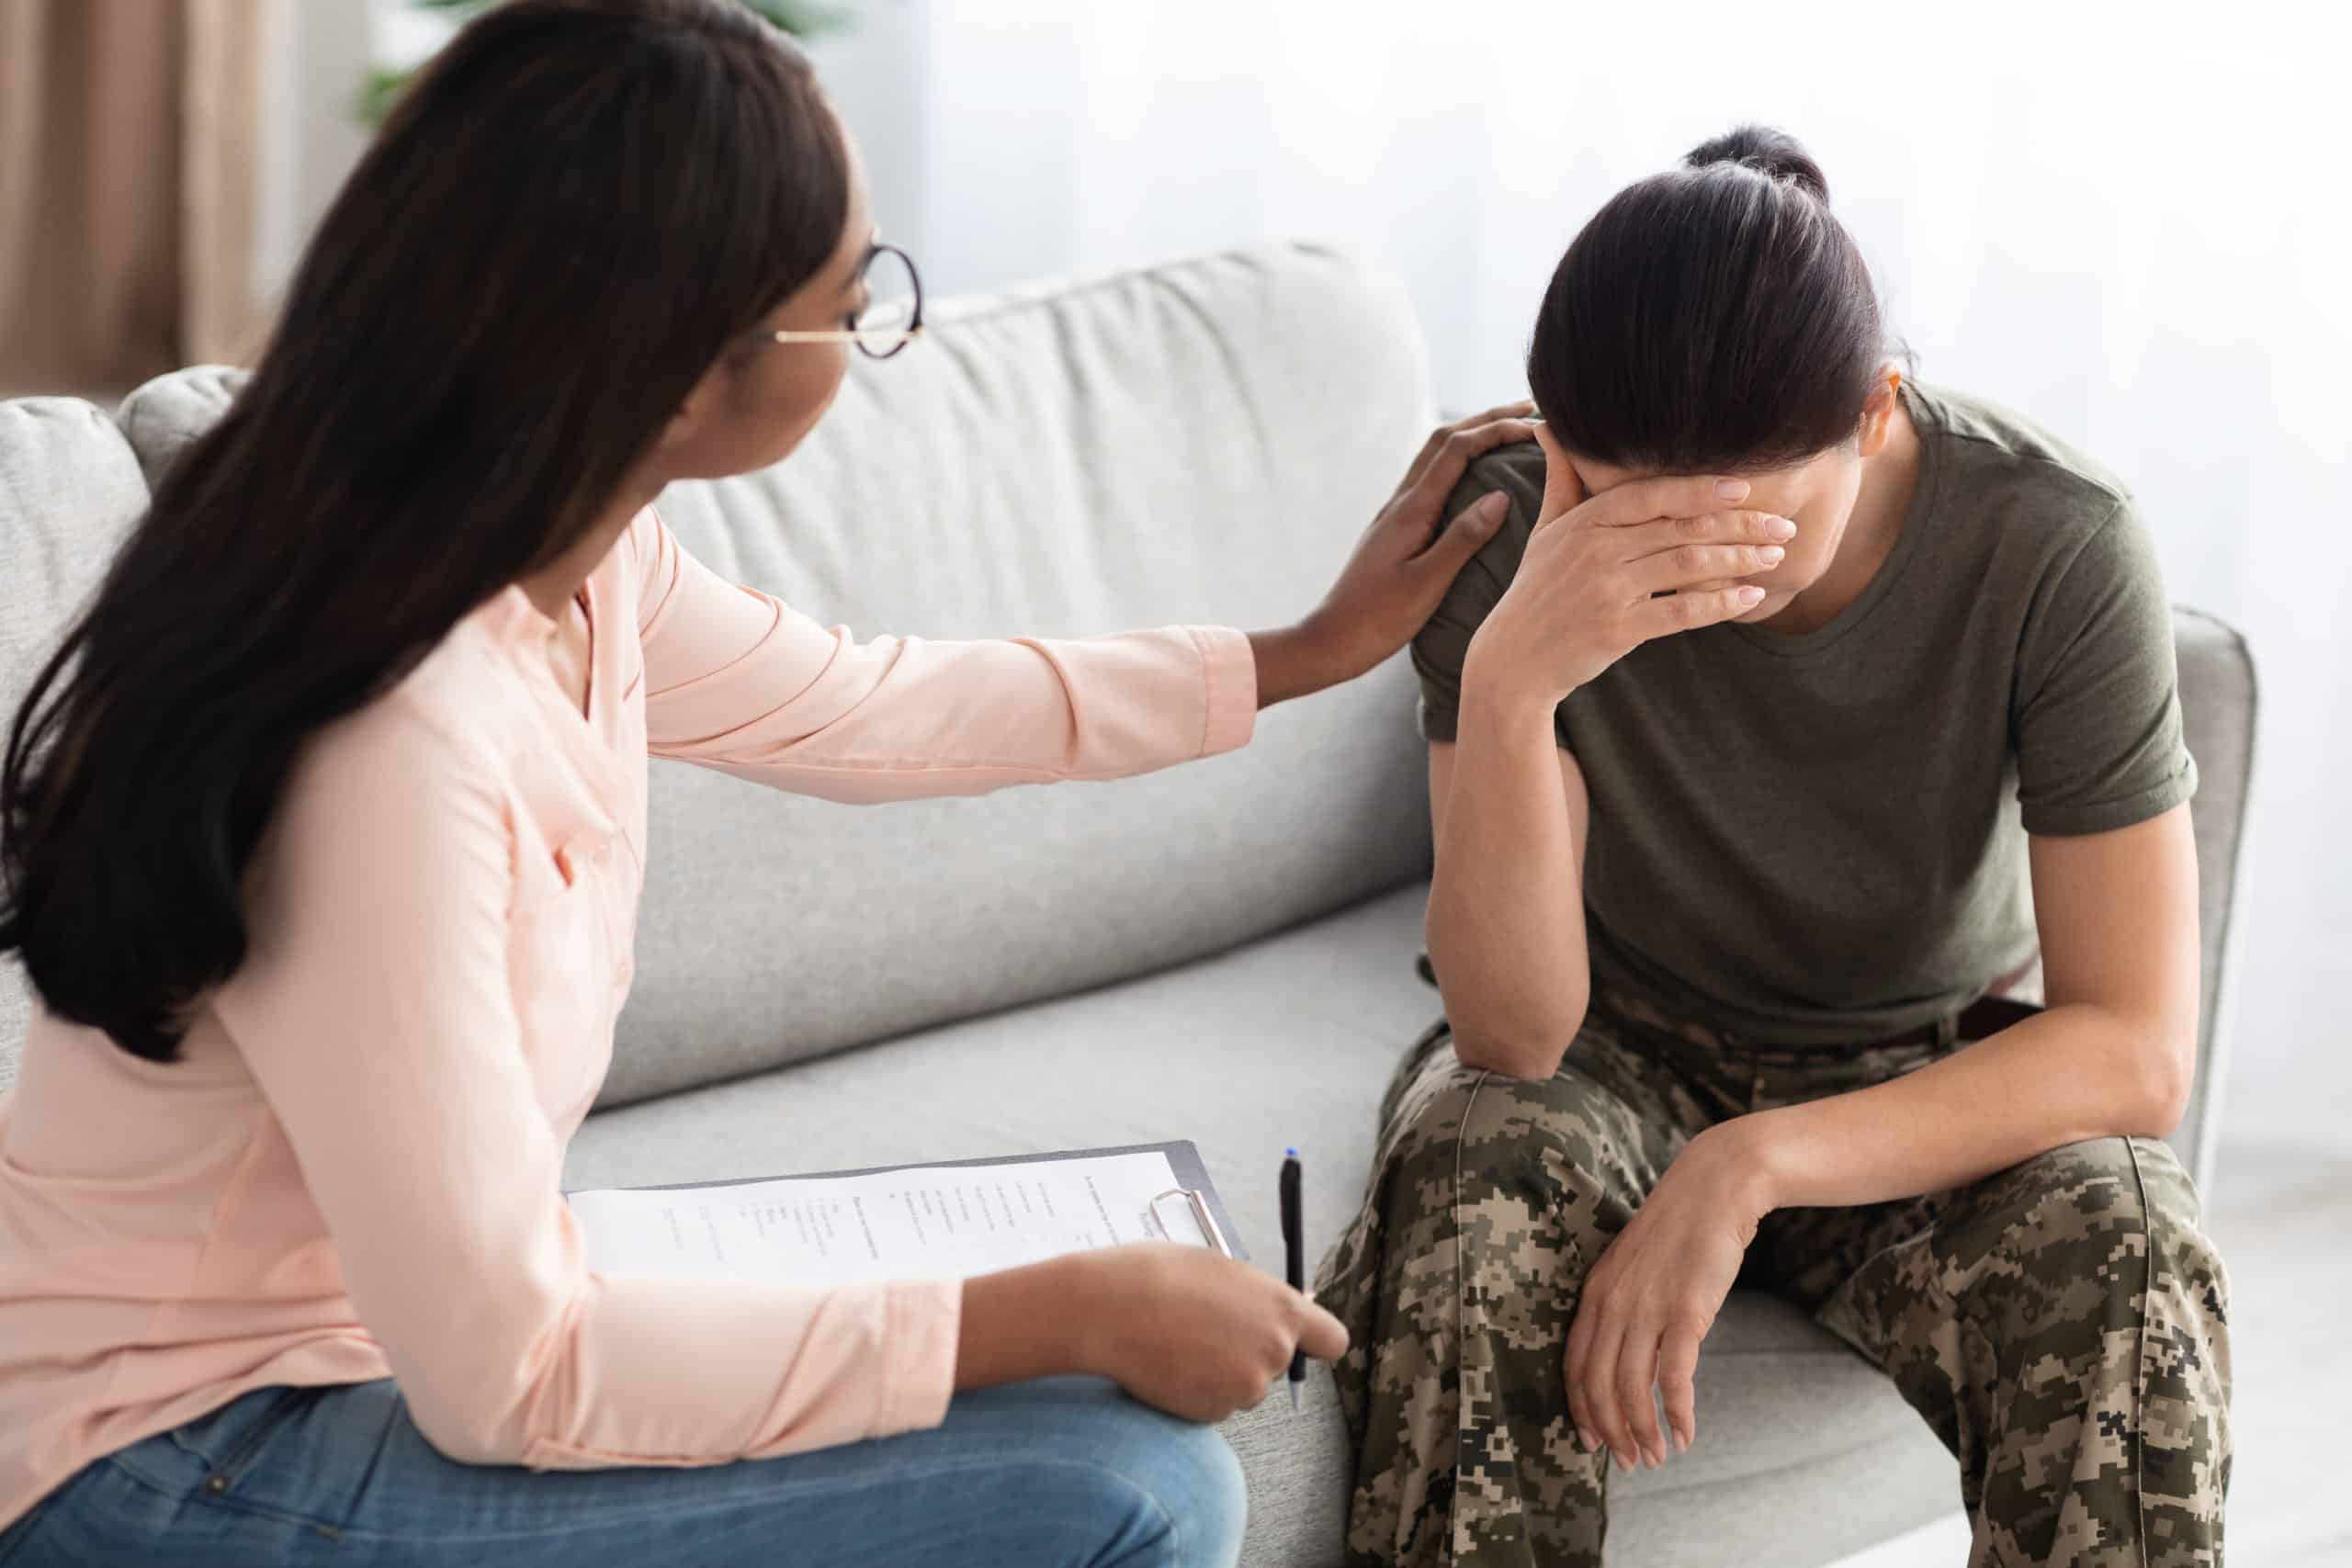 Black Psychologist Lady Comforting Soldier Woman In Uniform During Therapy Session